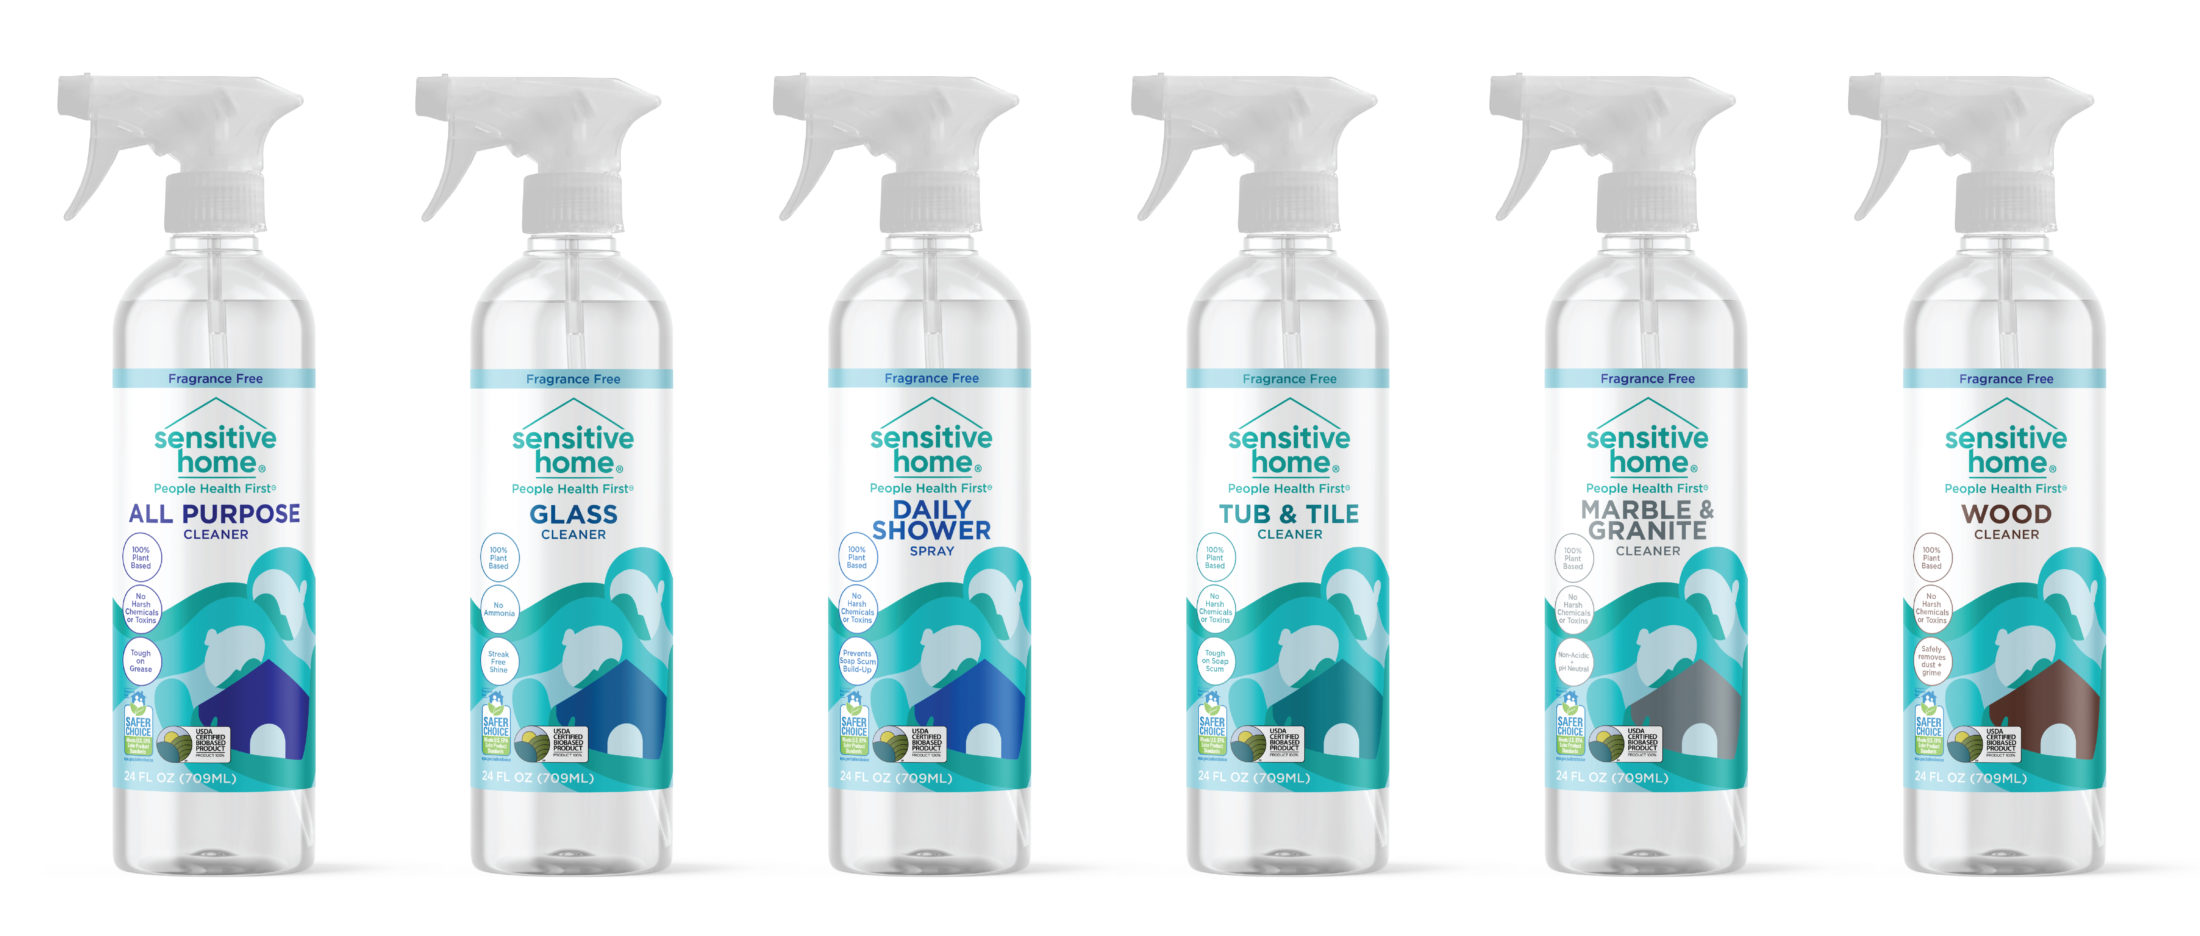 Lineup of Sensitive Home spray bottle cleaners photographed on white.